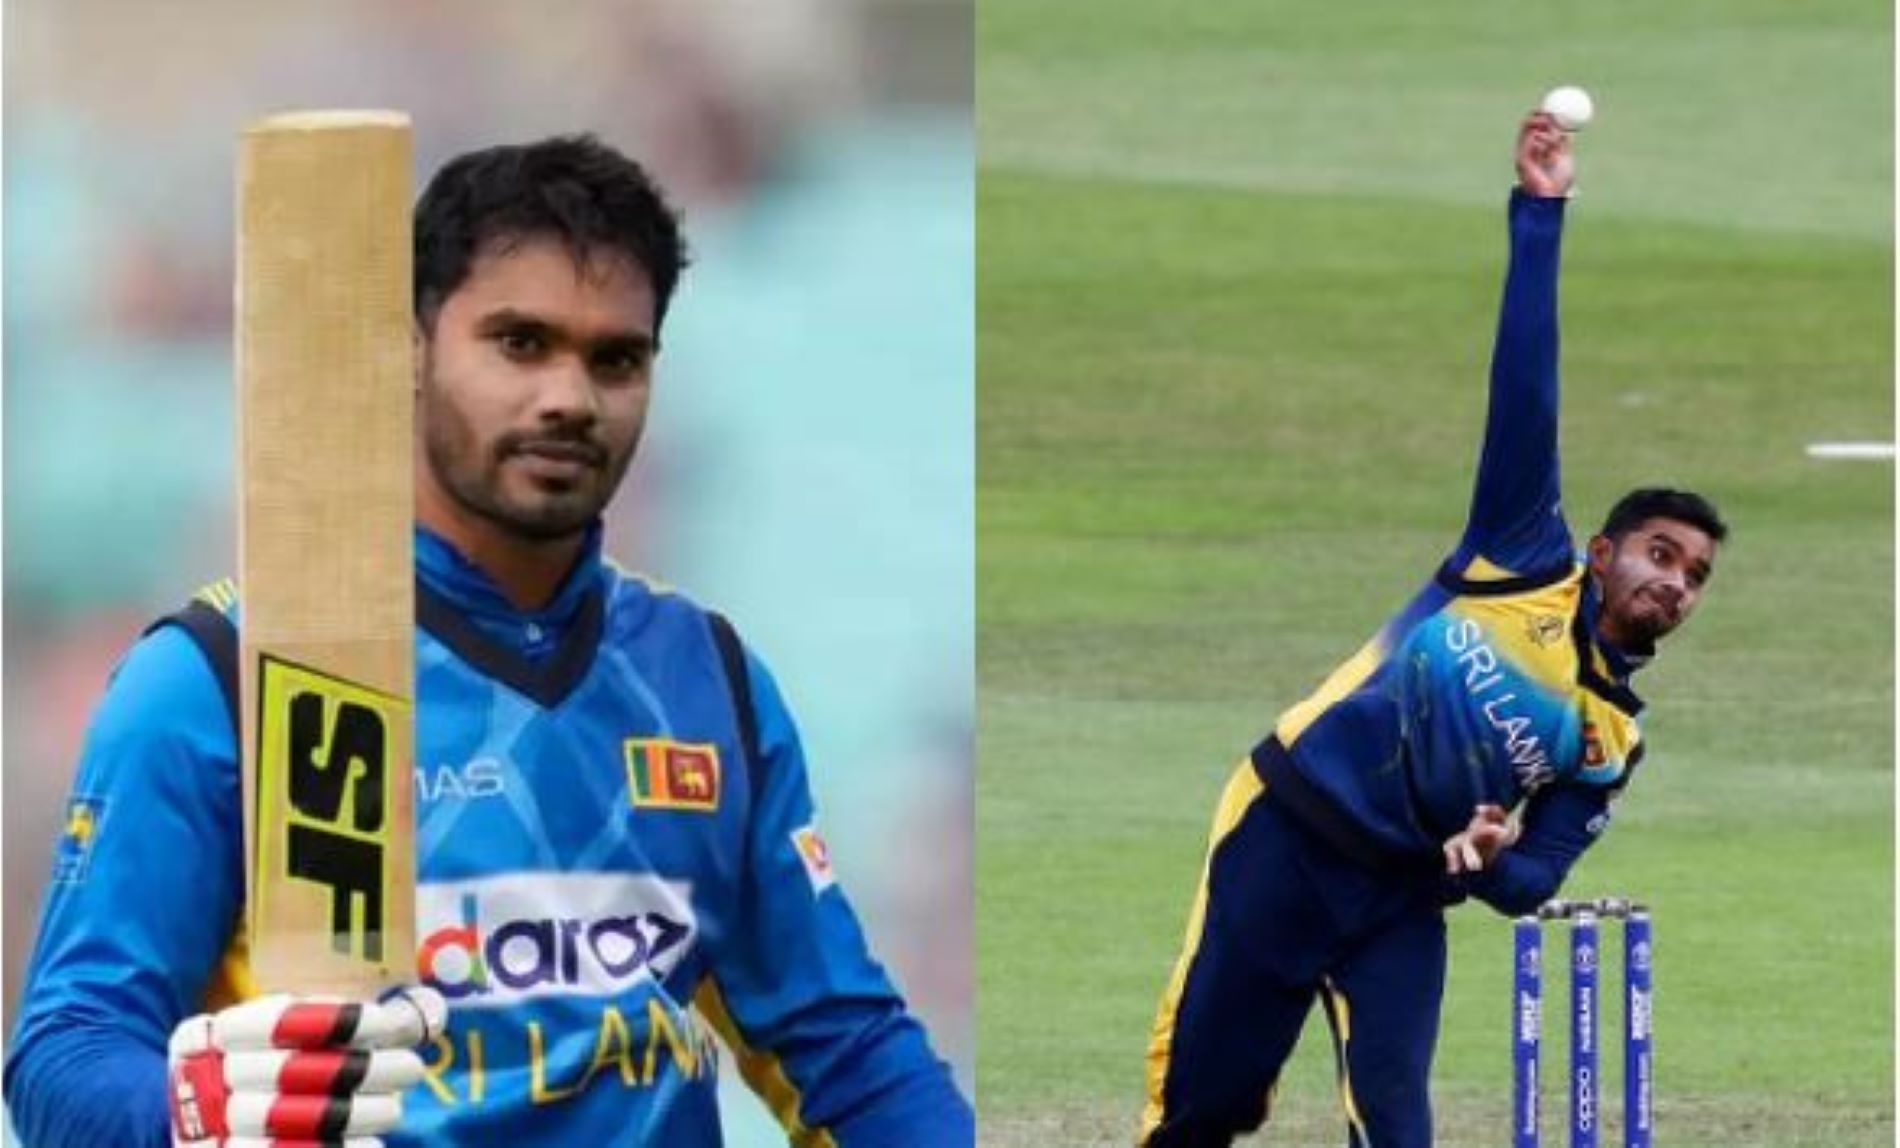 De Silva will be vital for Sri Lanka in the Asia Cup with the injury to Hasaranga.